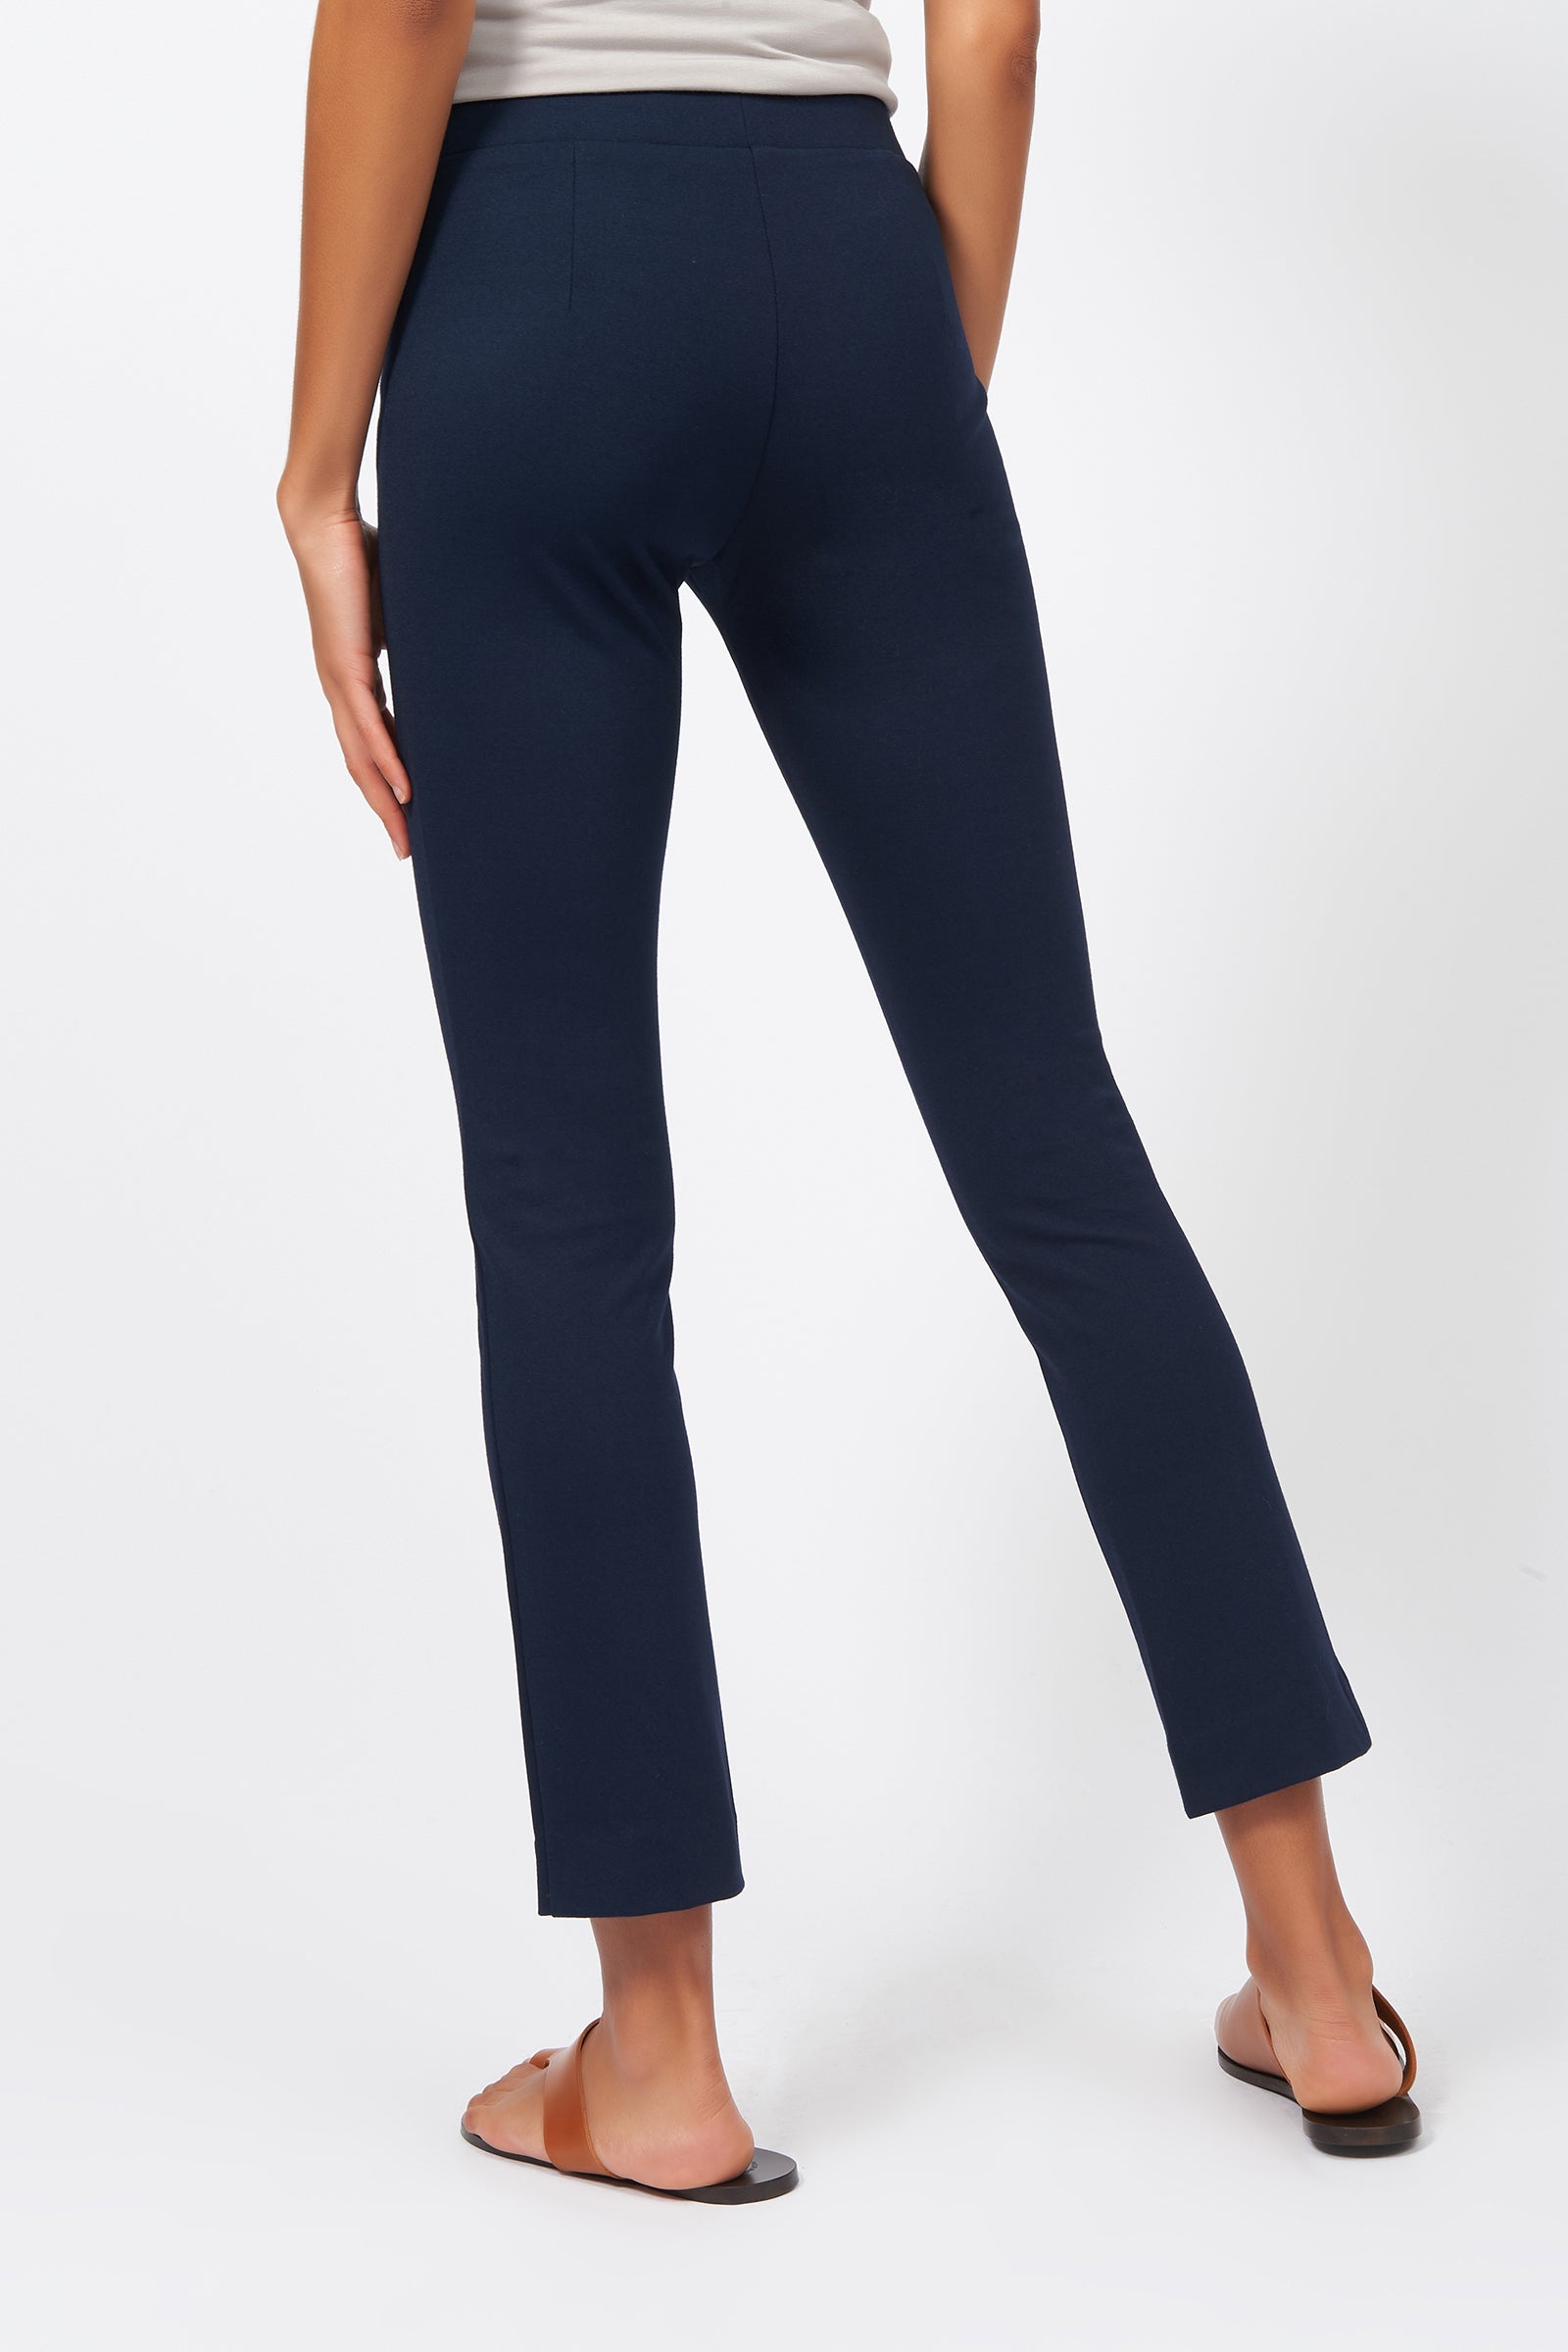 Christal pull-on pintuck ankle pant - navy / long (31 inseam) / xsmall